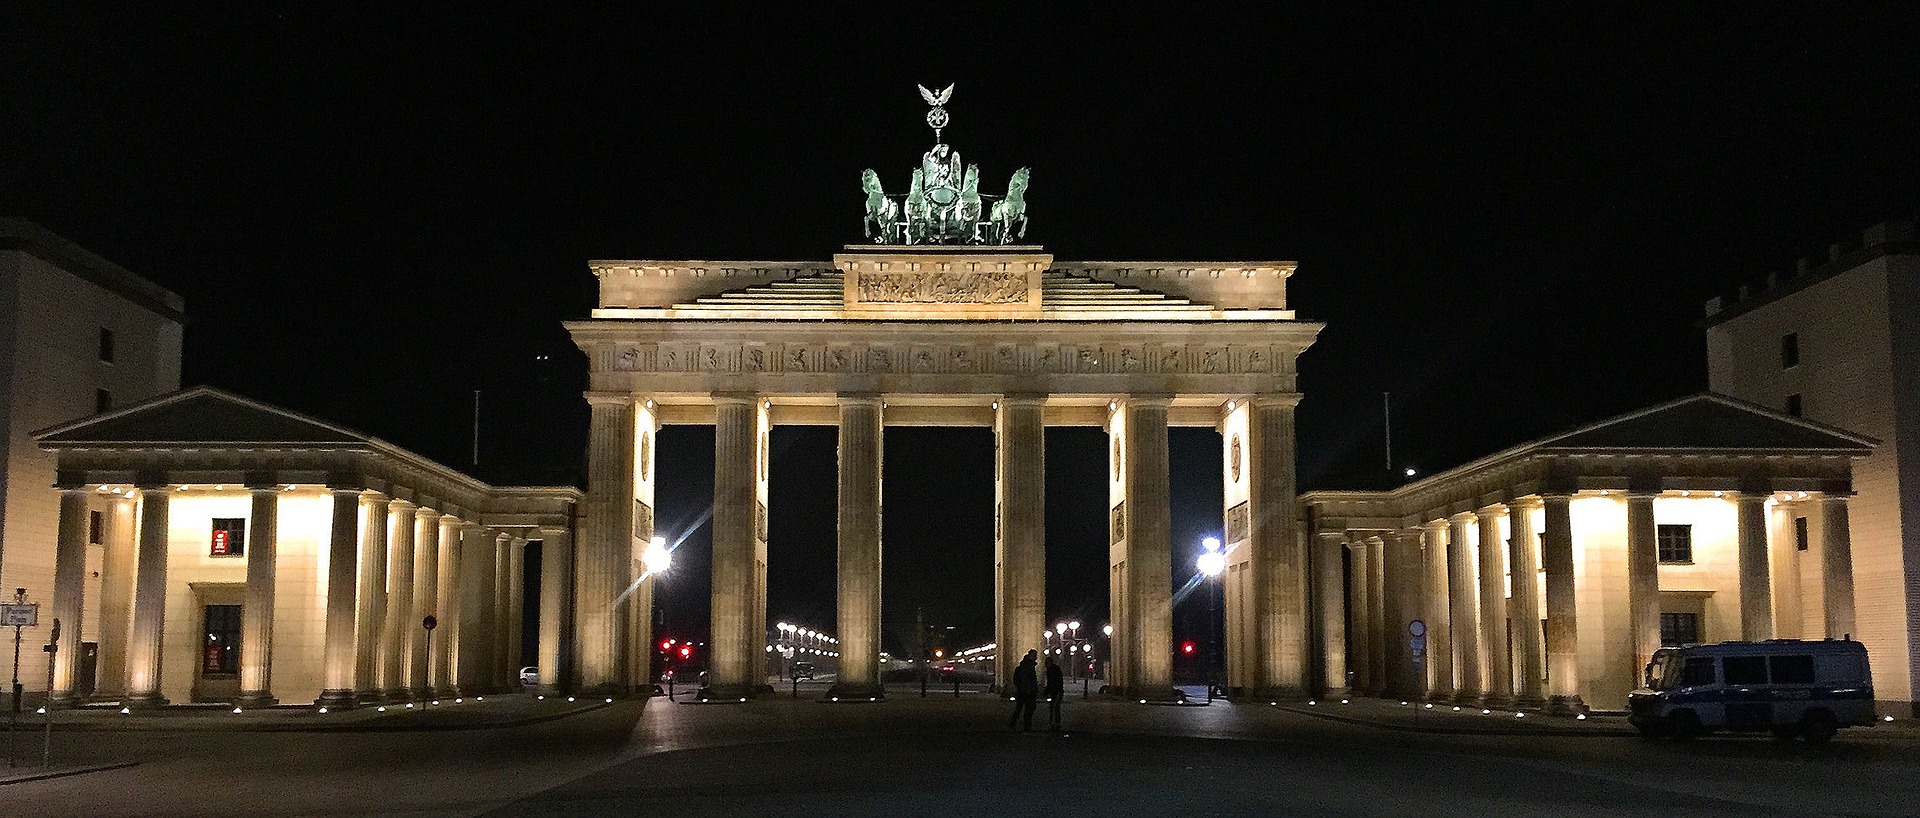 The picture shows Brandenburg tor by night